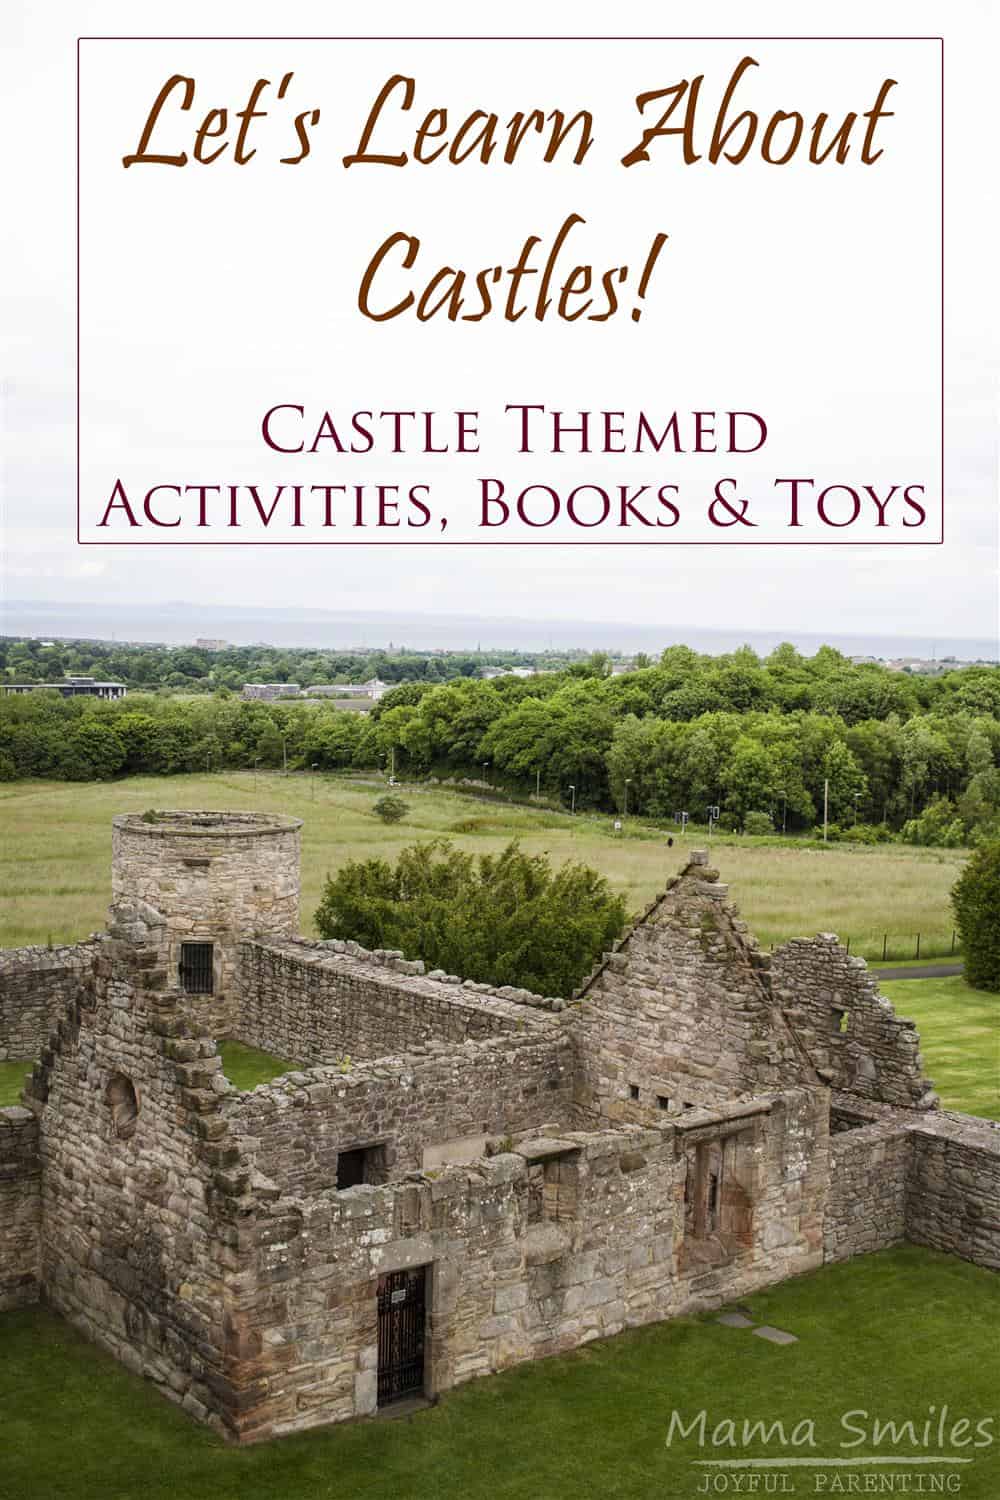 Castle themed activities, books, and toys - the best resources for teaching kids about castles.